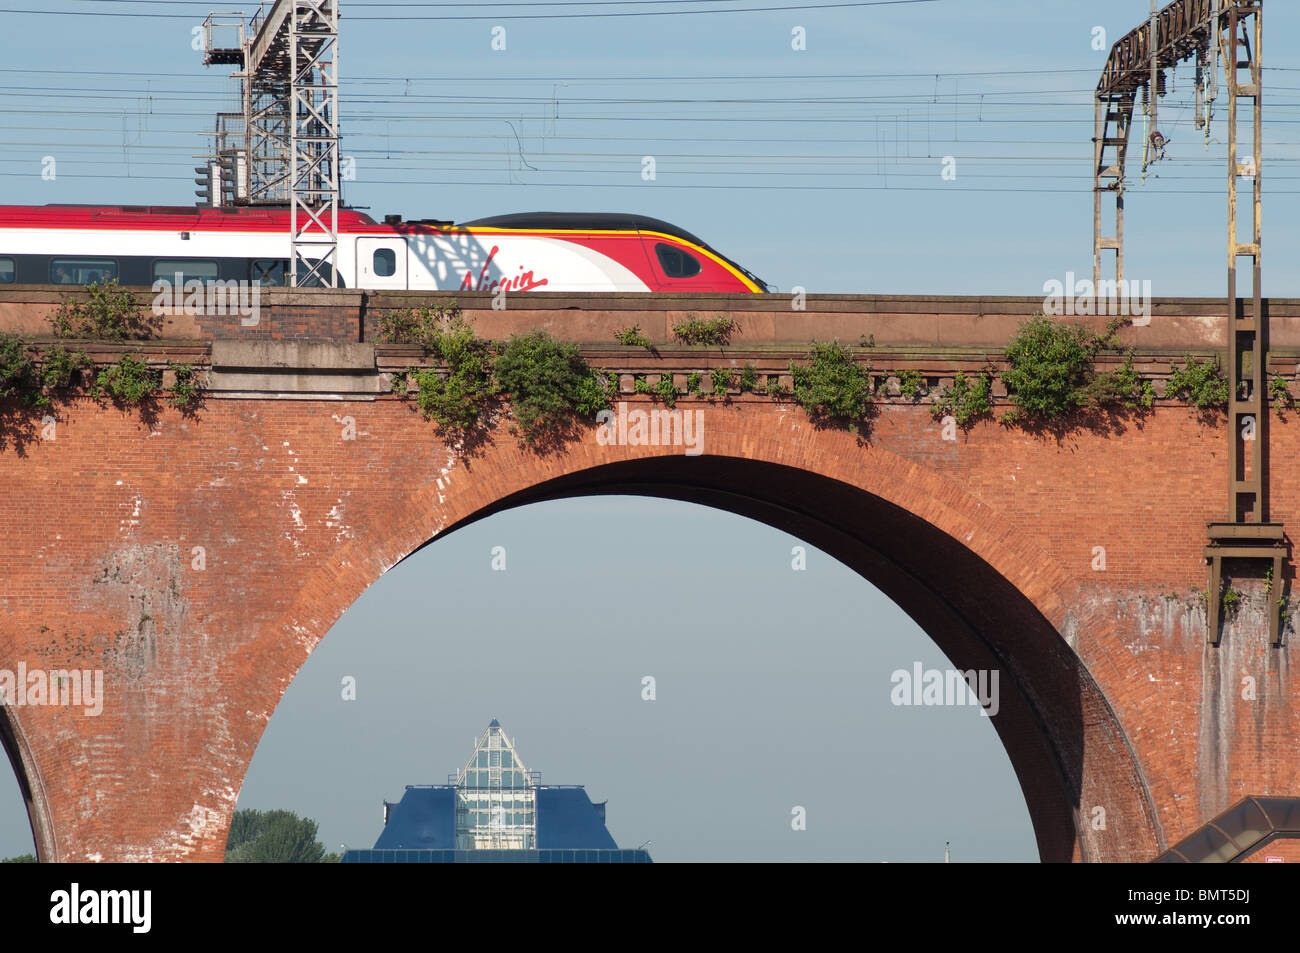 A Virgin train travels across Stockport Viaduct,built with 11 million bricks. Co-op Bank Pyramid building in the background. Stock Photo